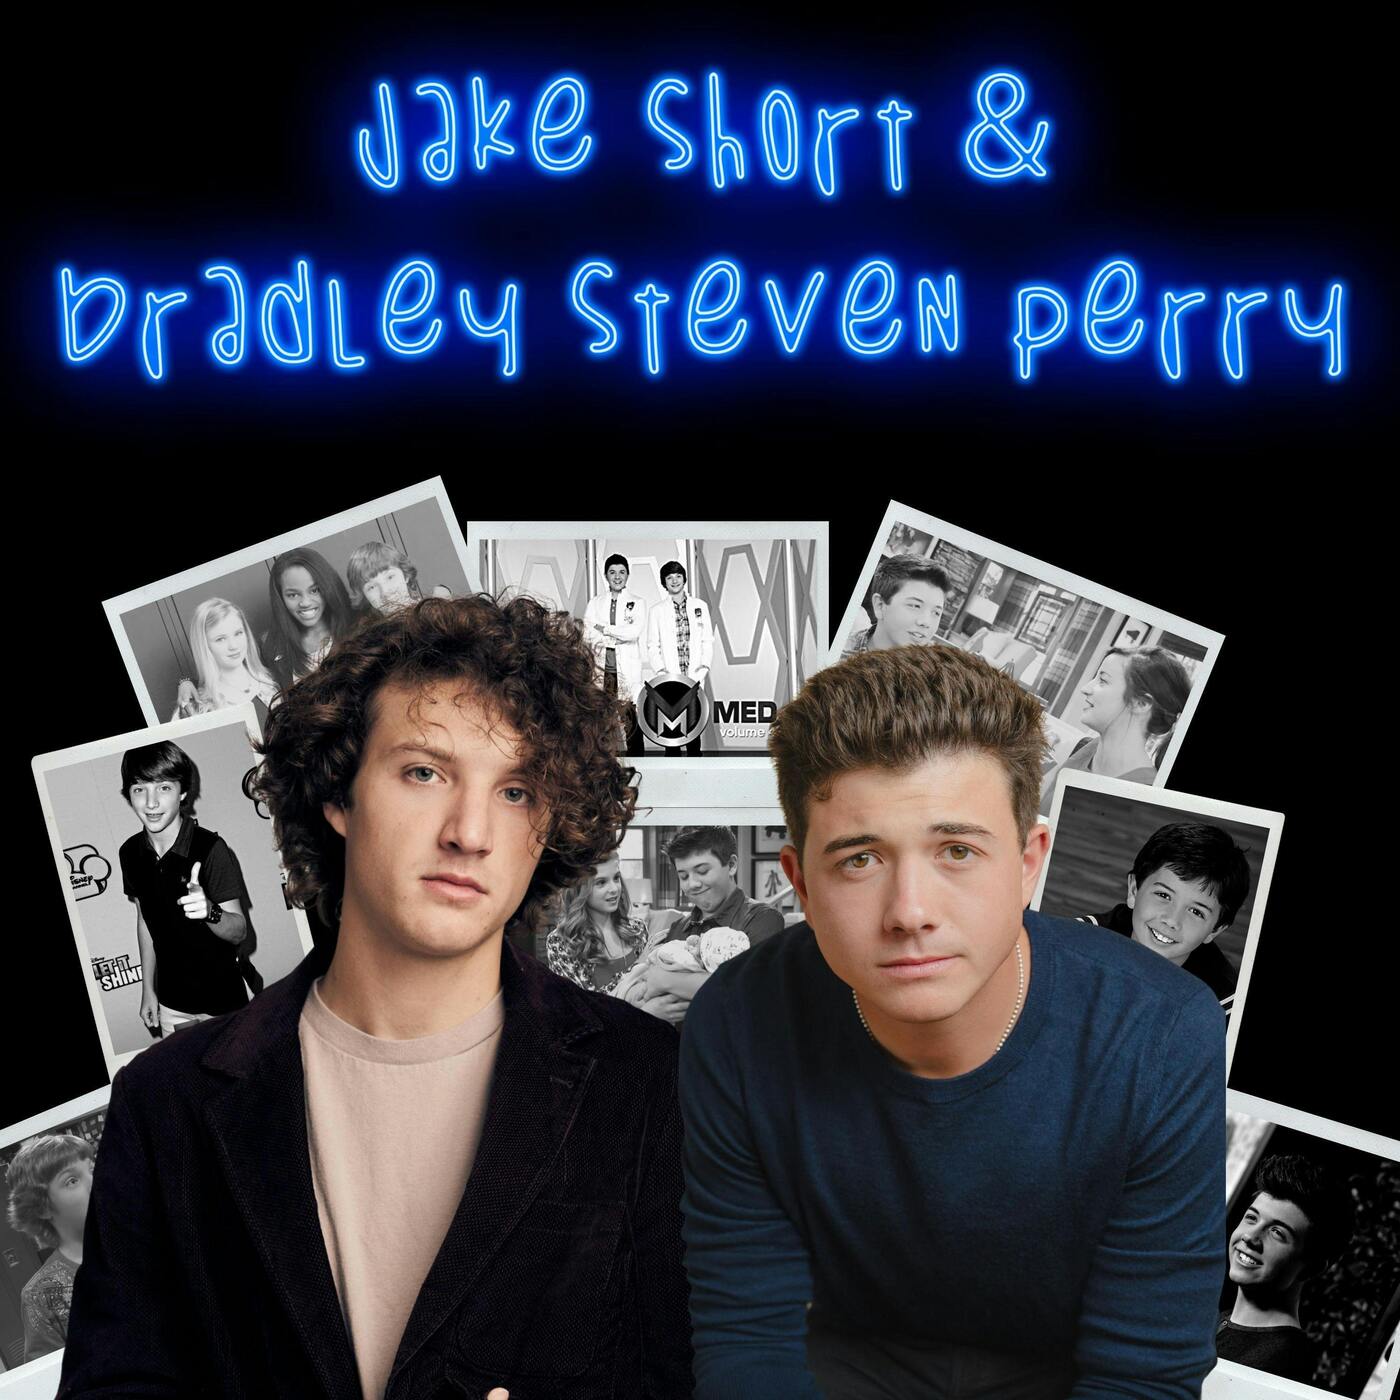 Vulnerable EP77: Mighty Med's Jake Short and Bradley Steven Perry on Growing Up on Disney